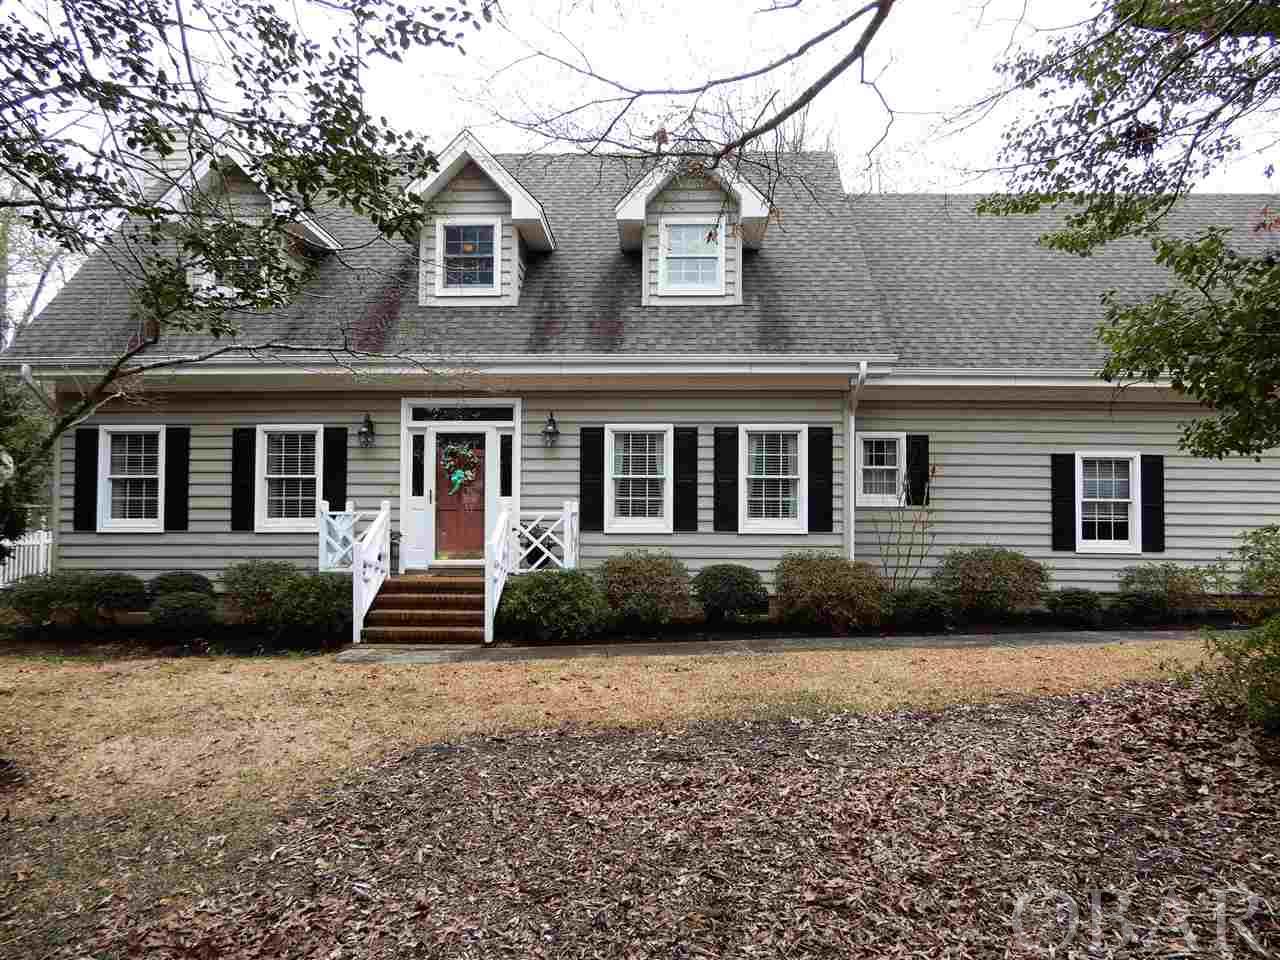 Must see this custom-built 4BR 3.5 BA home located on the northern end of Roanoke Island within the Brakewood community.  This warm, inviting Cape Cod home is filled with natural lighting featuring an open floor plan, spacious kitchen, gas fireplace, screened porch, outdoor deck, master ensuite with jetted tub, office workspace, bonus room, a large in-ground pool and more!  Making your favorite meals is a breeze with plenty of counter space.  This spacious kitchen is the perfect balance of elegance and functionality with granite counters, stainless appliances, a center island for sitting and adjacent pantry and laundry room.  The kitchen opens into the dining area make for perfect gathering spot for family or guests.  A home office space beautifully situated and equally convenient.  A built-in desk  with custom cabinetry and shelves will help you keep things tidy and in order.  You can unwind in the living room where the gas fireplace keeps you warm and cozy.  Looking for a soothing outdoor retreat?  The screened porch is the perfect way to extend your outdoor time throughout the seasons.  Sip on a cool glass of sweet tea while enjoying the peaceful sights and sounds of nature or to share a meal in the fresh air with your family and friends.  Summer, sun and swimming enjoyment.  The beautiful 9’ deep in-ground pool is a wonderful way to cool off during the hot summer months.  Plenty of space to entertain or relax while enjoying privacy in the fenced in backyard space.  The ensuite master bathroom is complete with walk in closet, built in vanity, jetted tub and walk-in shower provides an oasis of peace and safe haven after a long day.   Finished room above the garage provides extra space that is always welcomed! Whether you use it as a guest bedroom, playroom or office, it’s a bonus room with flexibility.  The garage has plenty of room for two vehicles plus shelfing for storing outdoor hobby gear or seasonal decor.  If the power goes out, you don’t need to worry - just connect the portable generator to have power during the outage.  Updates throughout the home include granite countertops, backyard fencing, roof gutters, tankless water heater, gas fireplace with remote control, additional wireless hotspots, and additional attic insulation. Newer roof and pool liner plus cover.  Installed town water meter with water lines to the house.  Furnishings are not included.  Great opportunity for first time home buyer, retiring couple or family looking for a quiet residential community near Historic Manteo, schools, shopping, restaurants and attractions.  Please use Covid protocol - wear a mask and use hand sanitizer during showings.